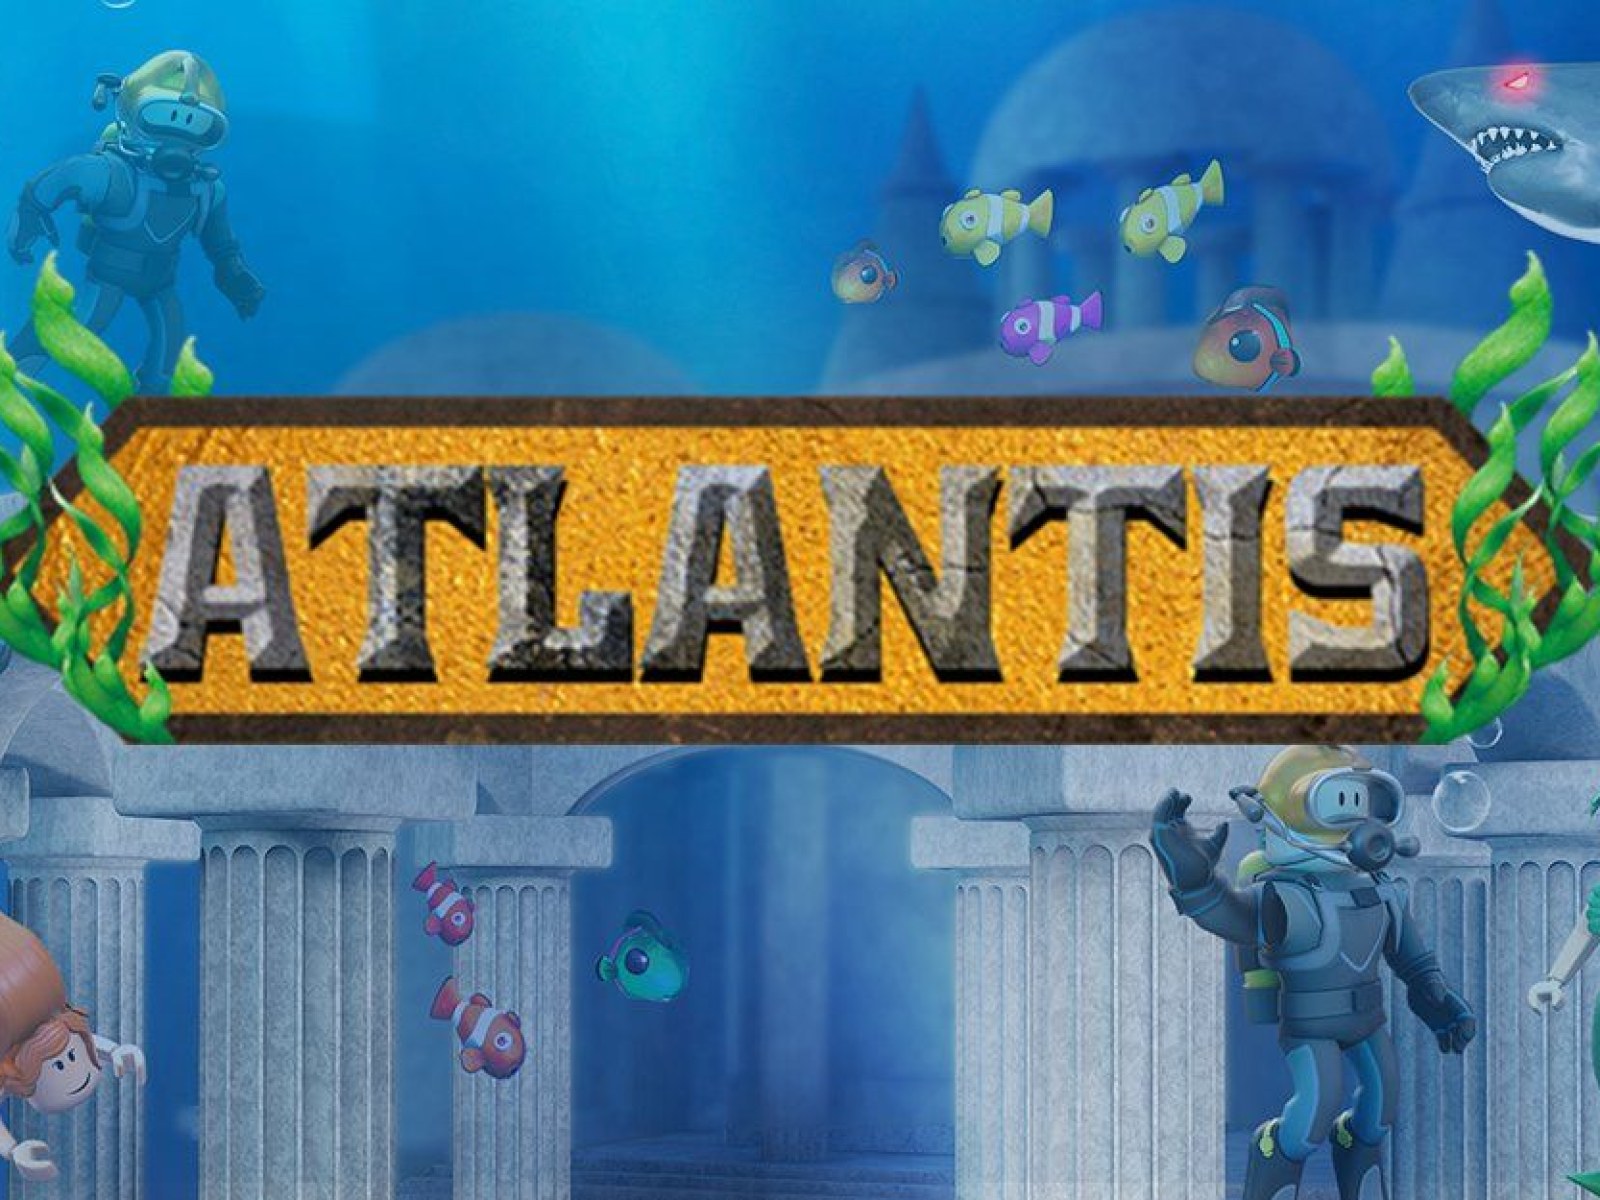 Roblox Atlantis Event Guide How To Get Atlantean Pauldrons And Tiara In Disaster Island Walkthrough - roblox events 2018 items